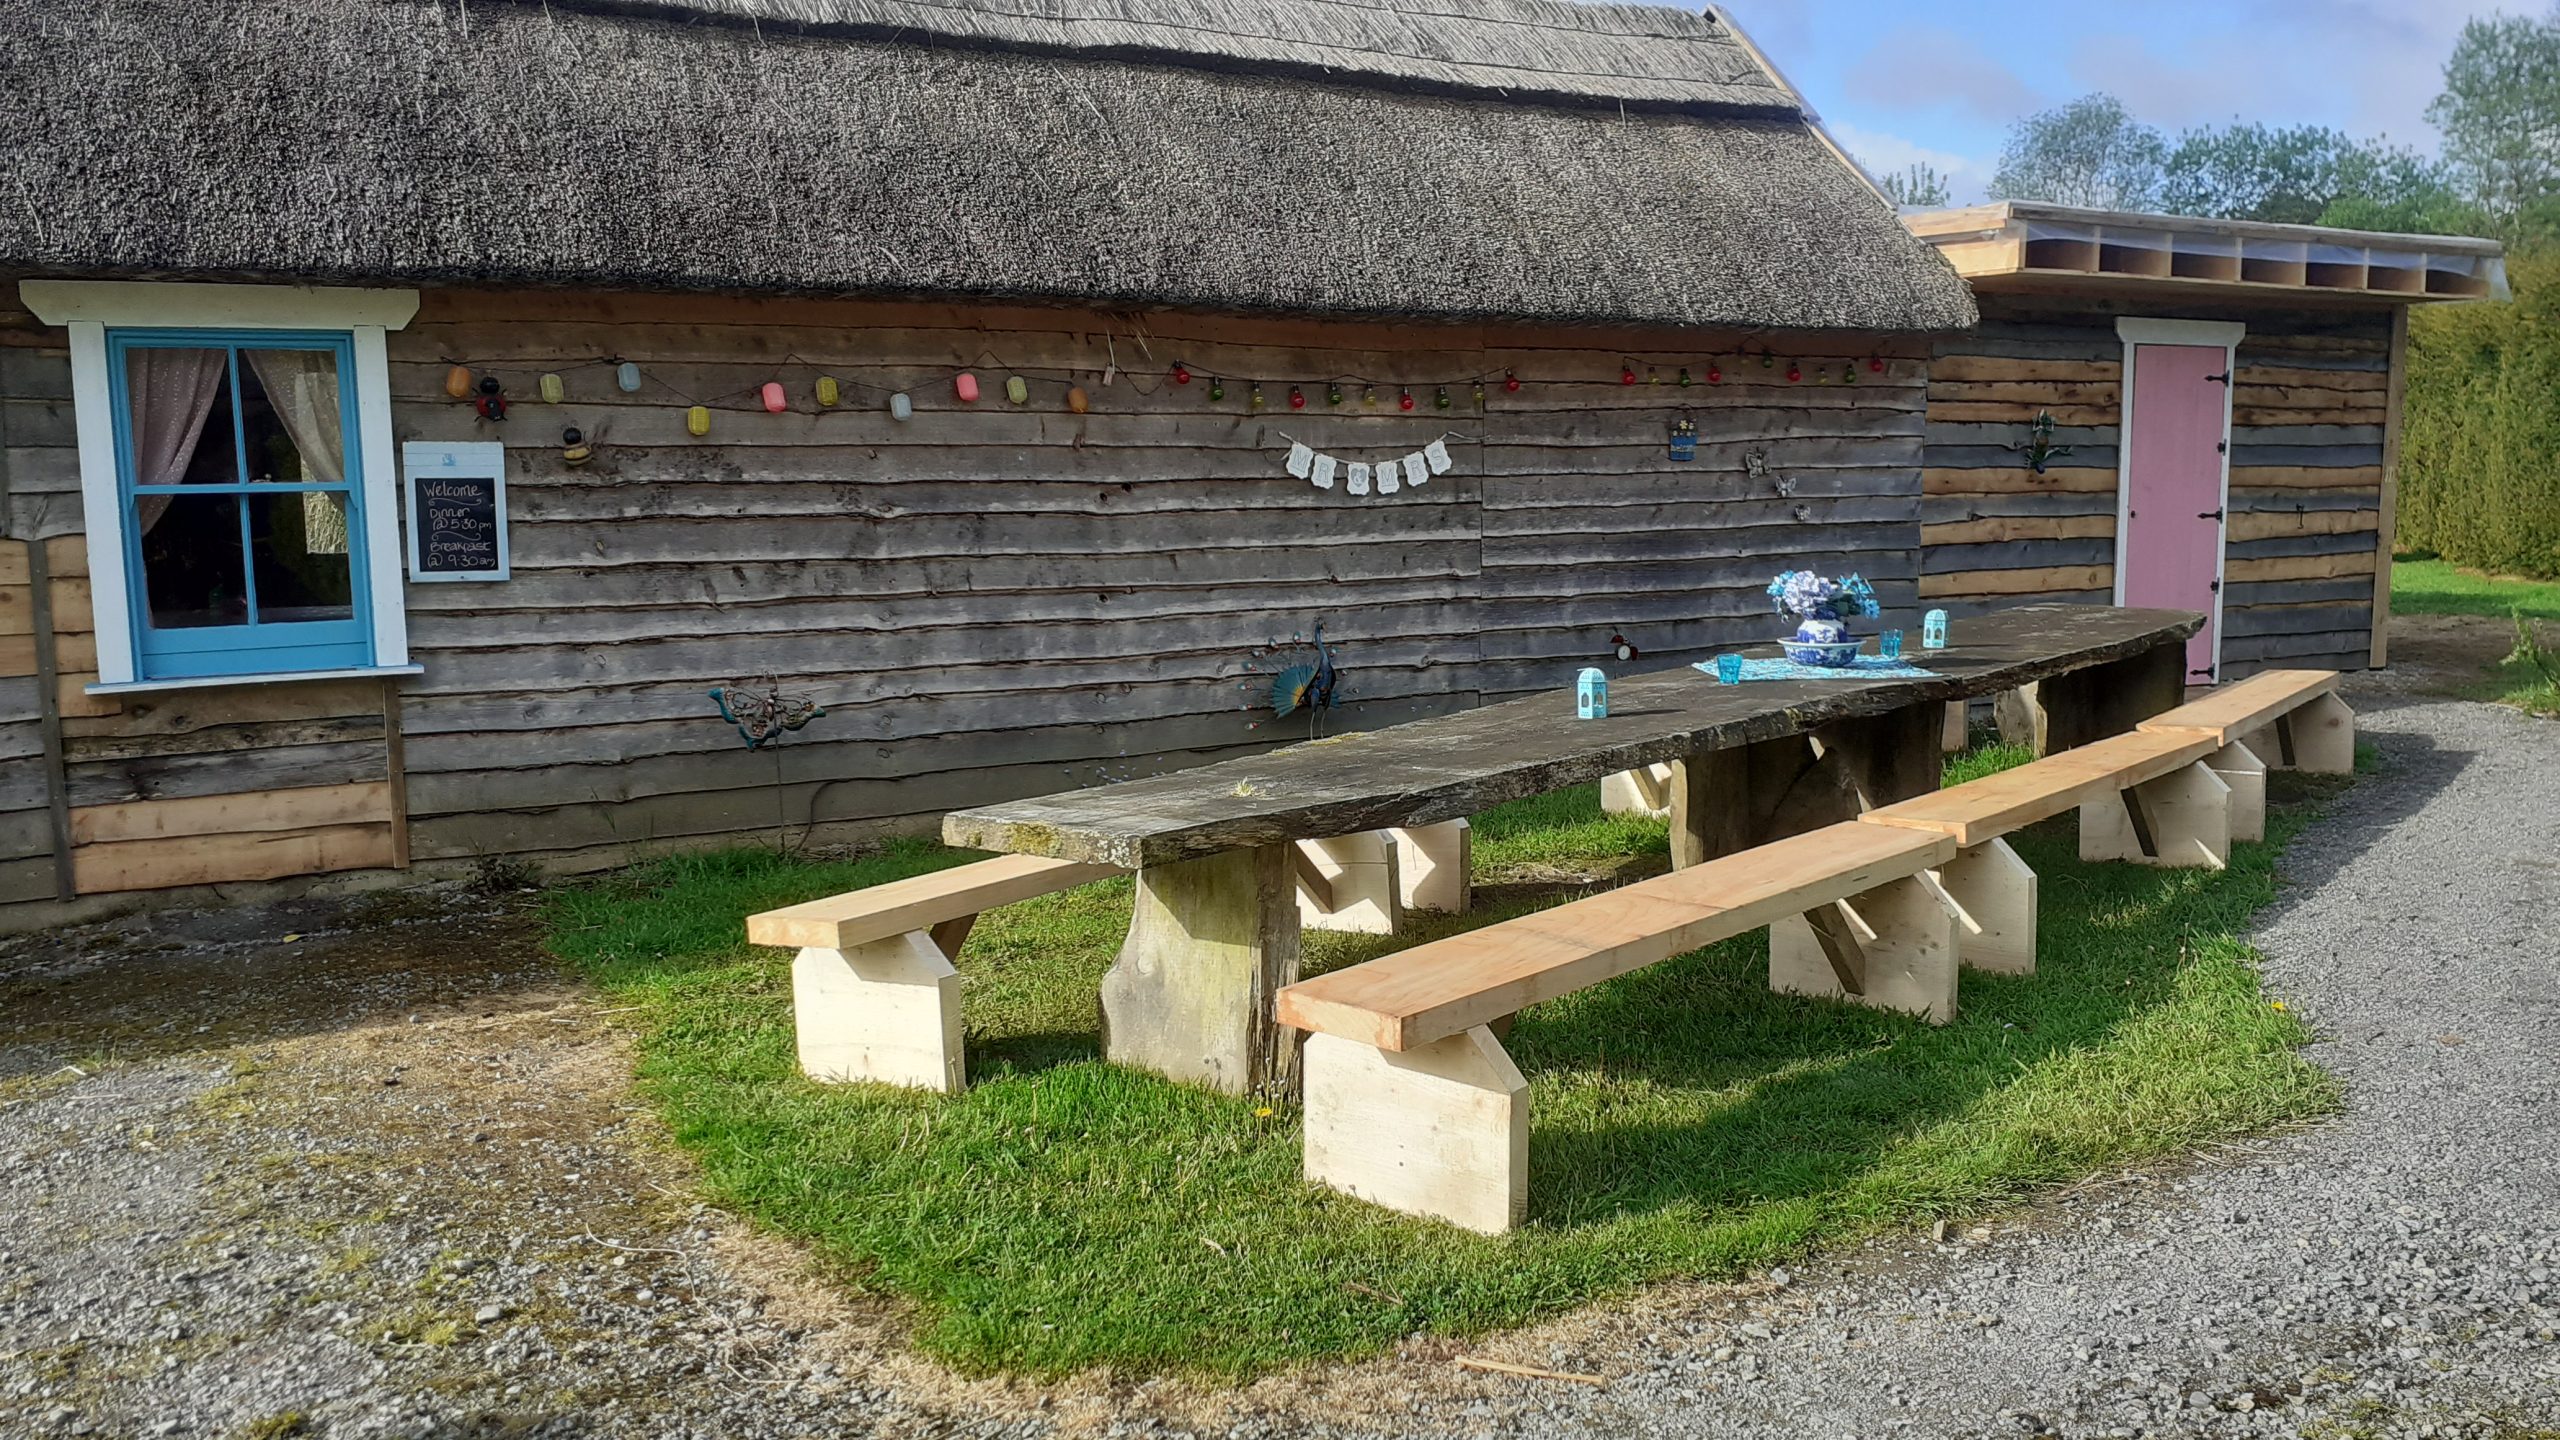 New bench Seats at Outdoor Tables - Boglands Hideaway - Glamping for Couples